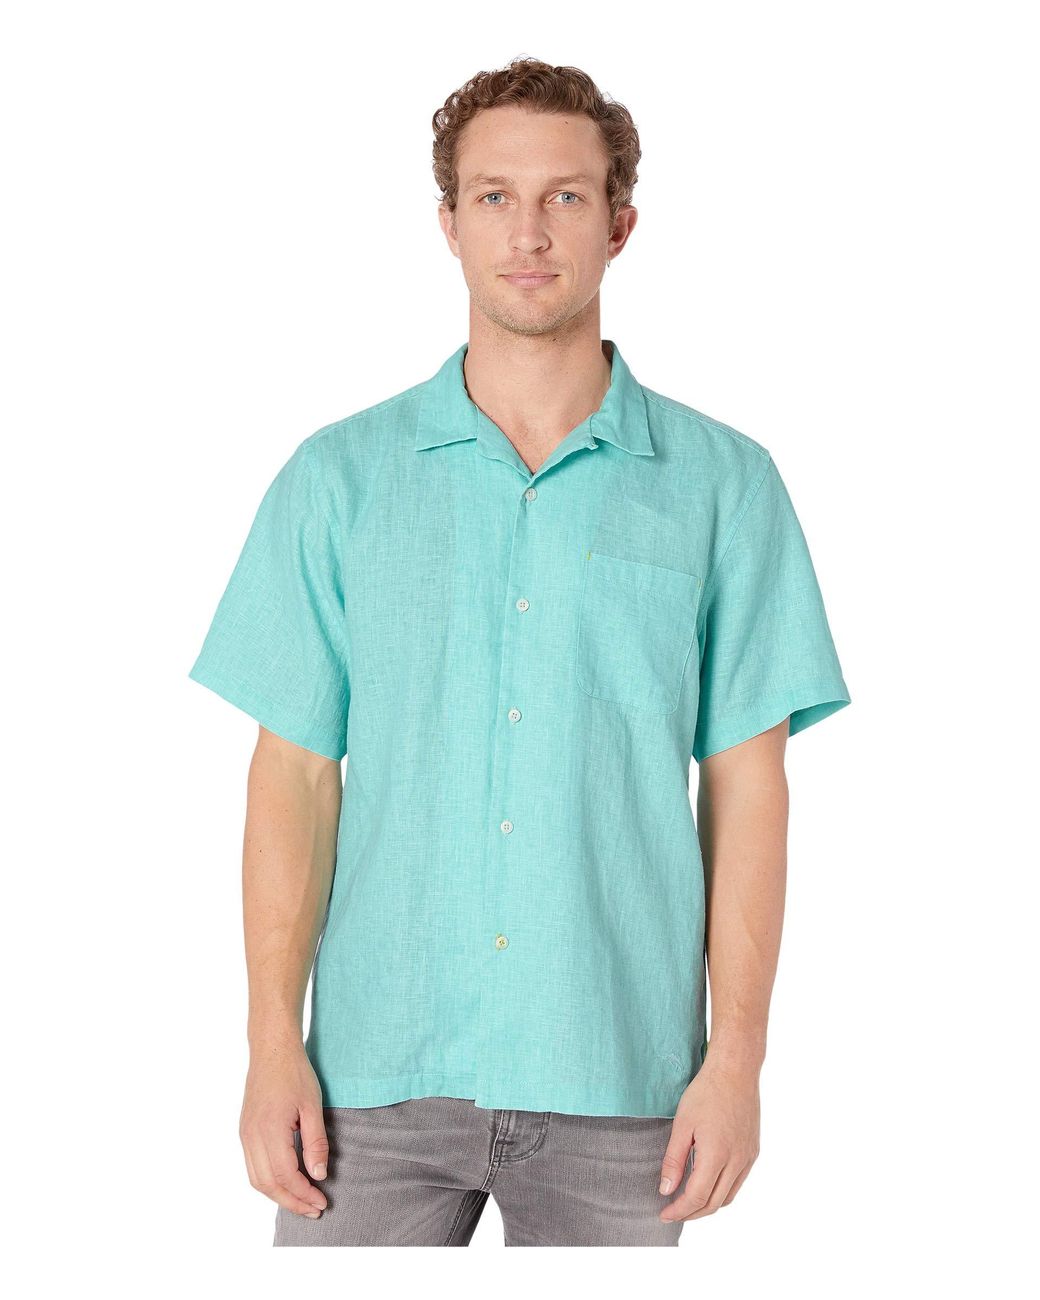 Tommy Bahama Linen Sea Glass Camp Shirt Clothing in Blue for Men - Lyst